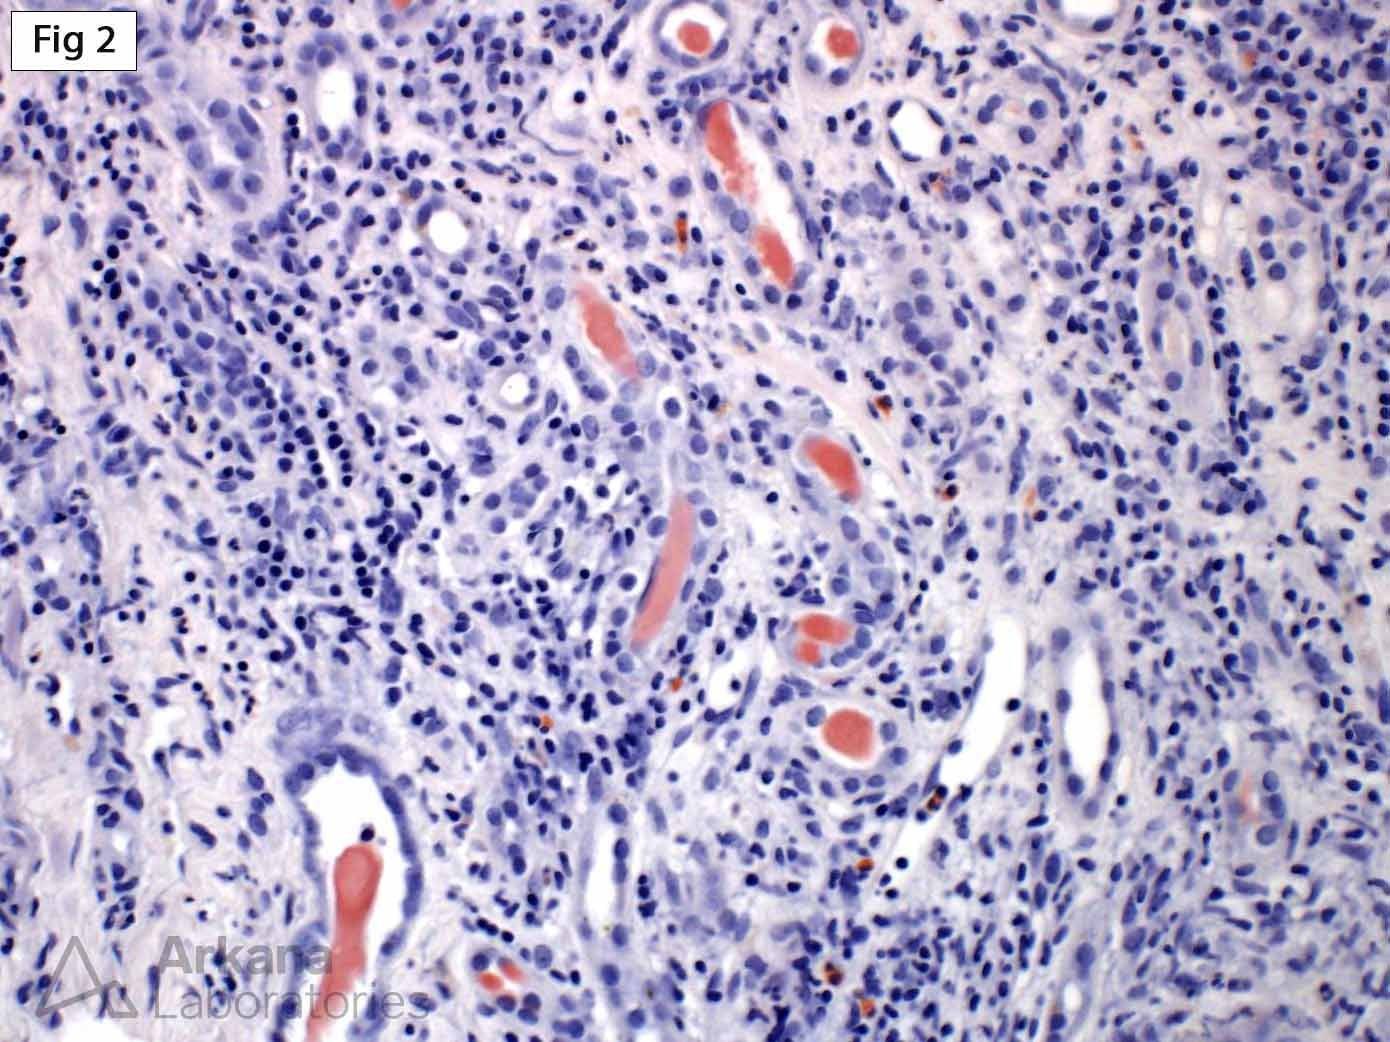 Light Chain Cast Nephropathy with Congo Red Staining